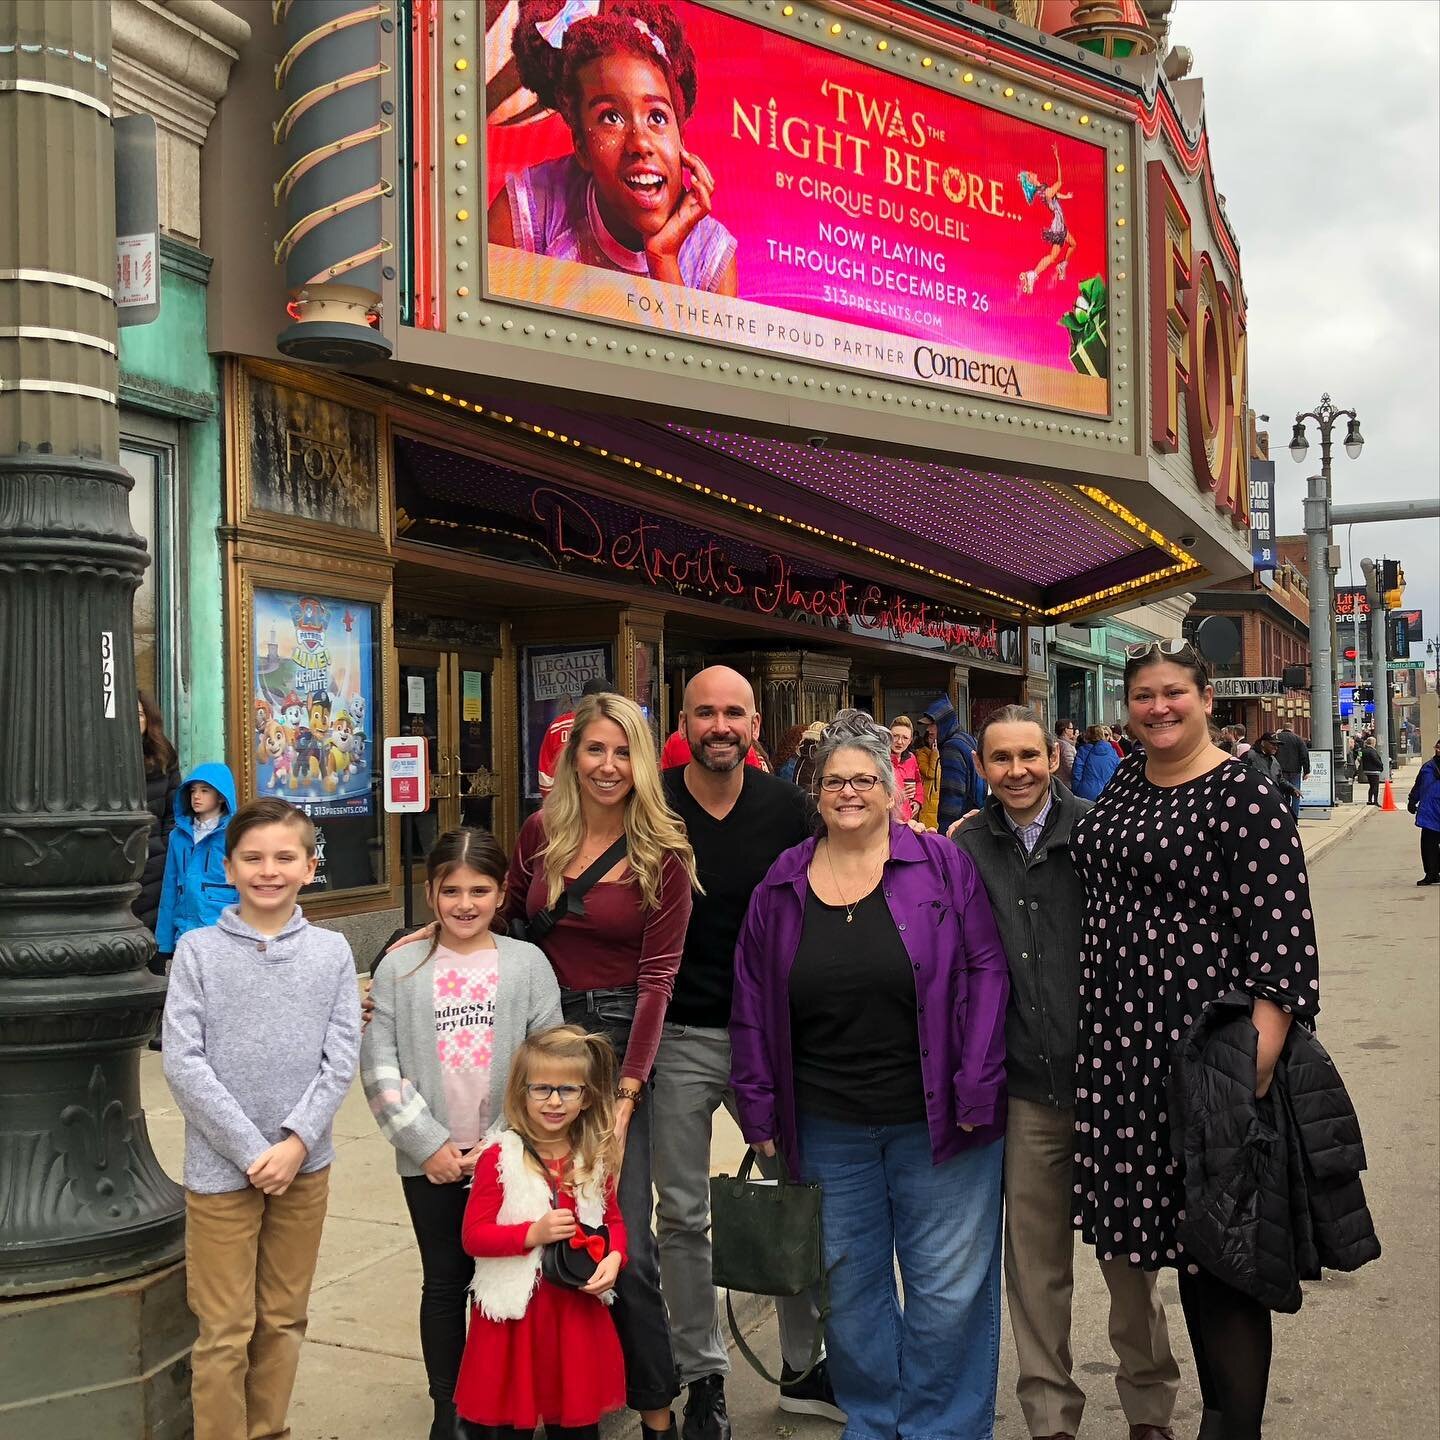 We kicked off Christmas Break with an adventure! Headed to The Fox Theatre to see Cirque du Soleil, &lsquo;Twas the Night! Thank you, Grandma Cece for such a fun day!